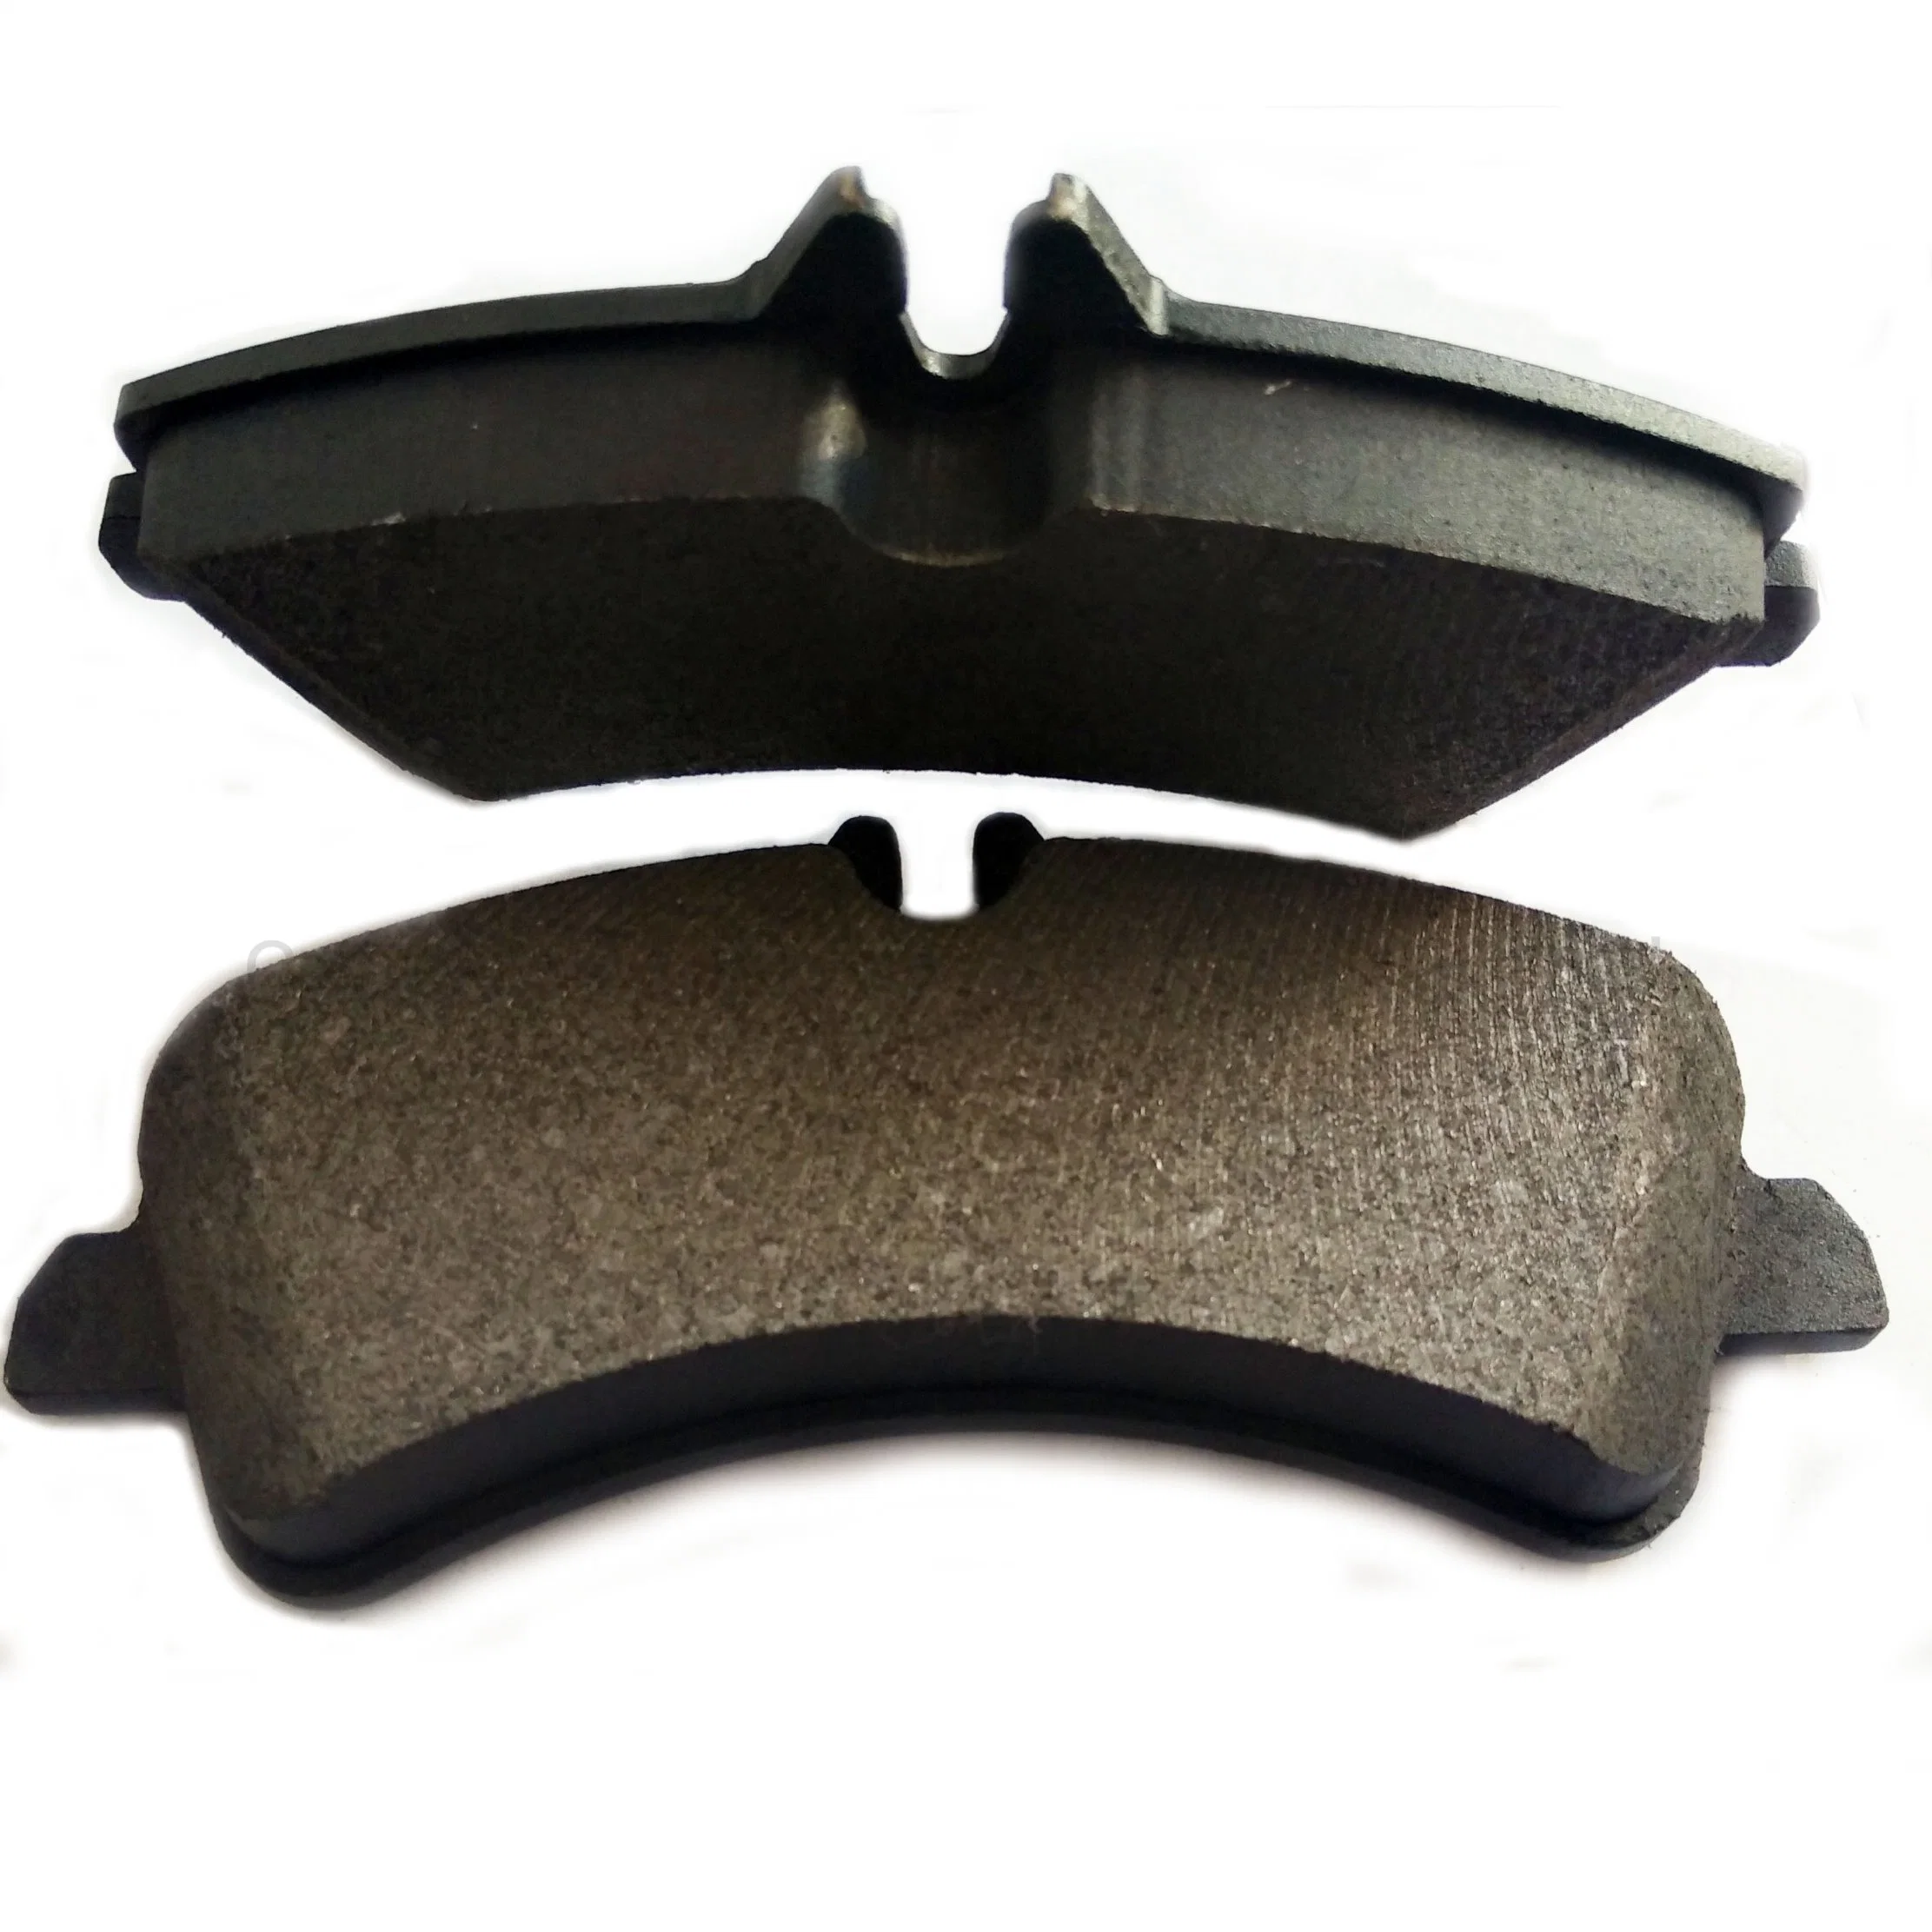 Truck and Passager Car Auto Brake Pad Set D1318